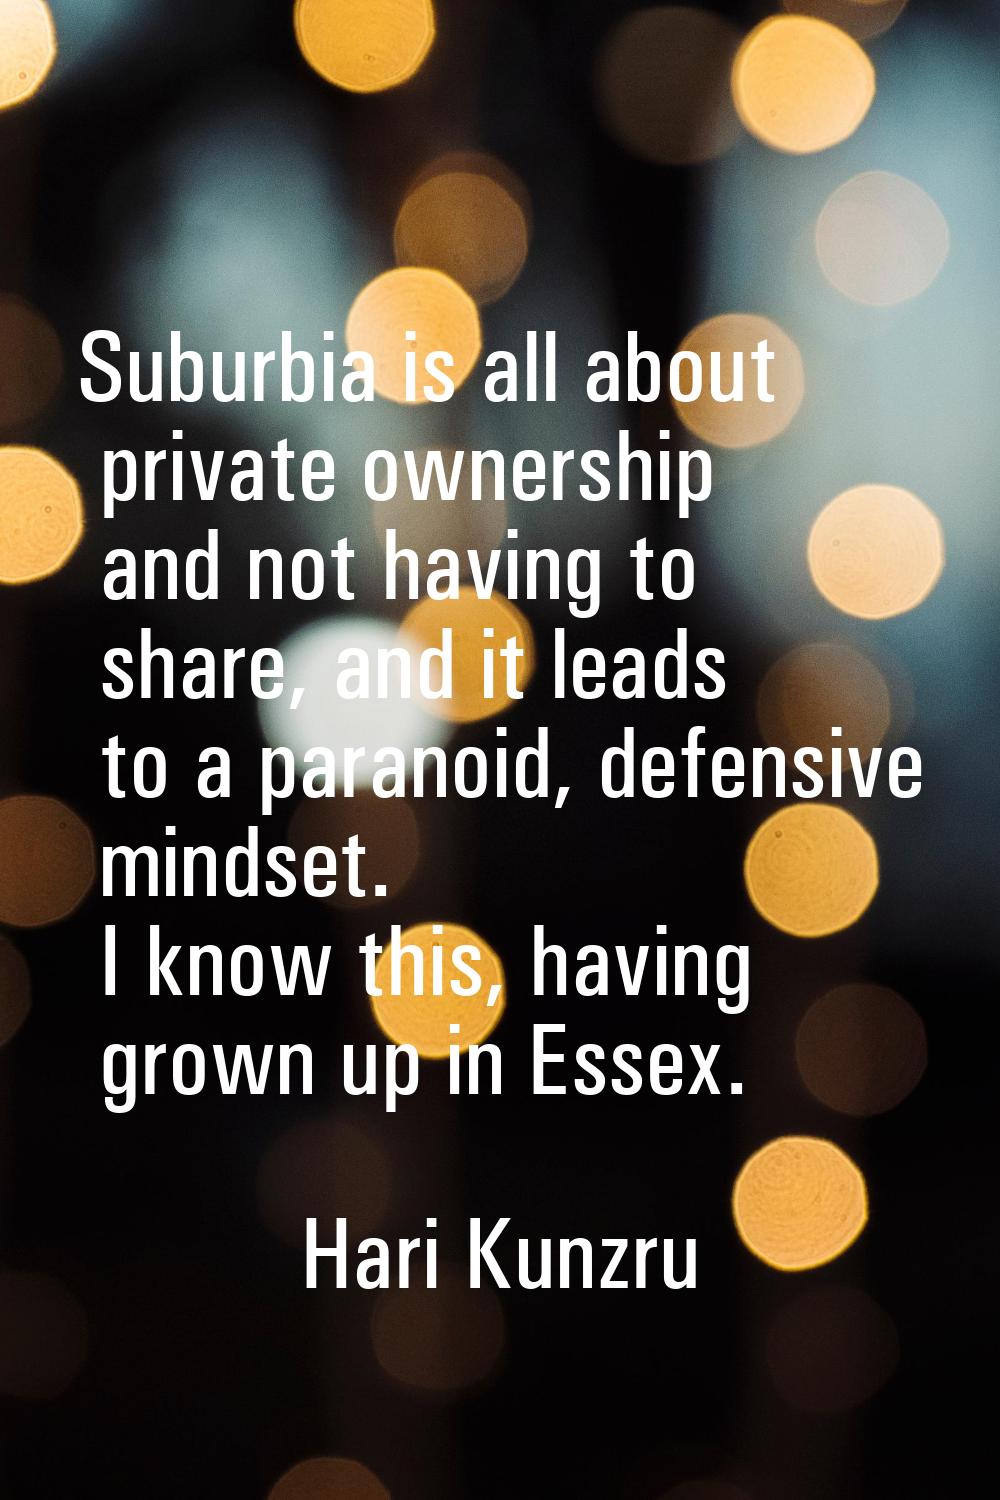 Suburbia is all about private ownership and not having to share, and it leads to a paranoid, defens